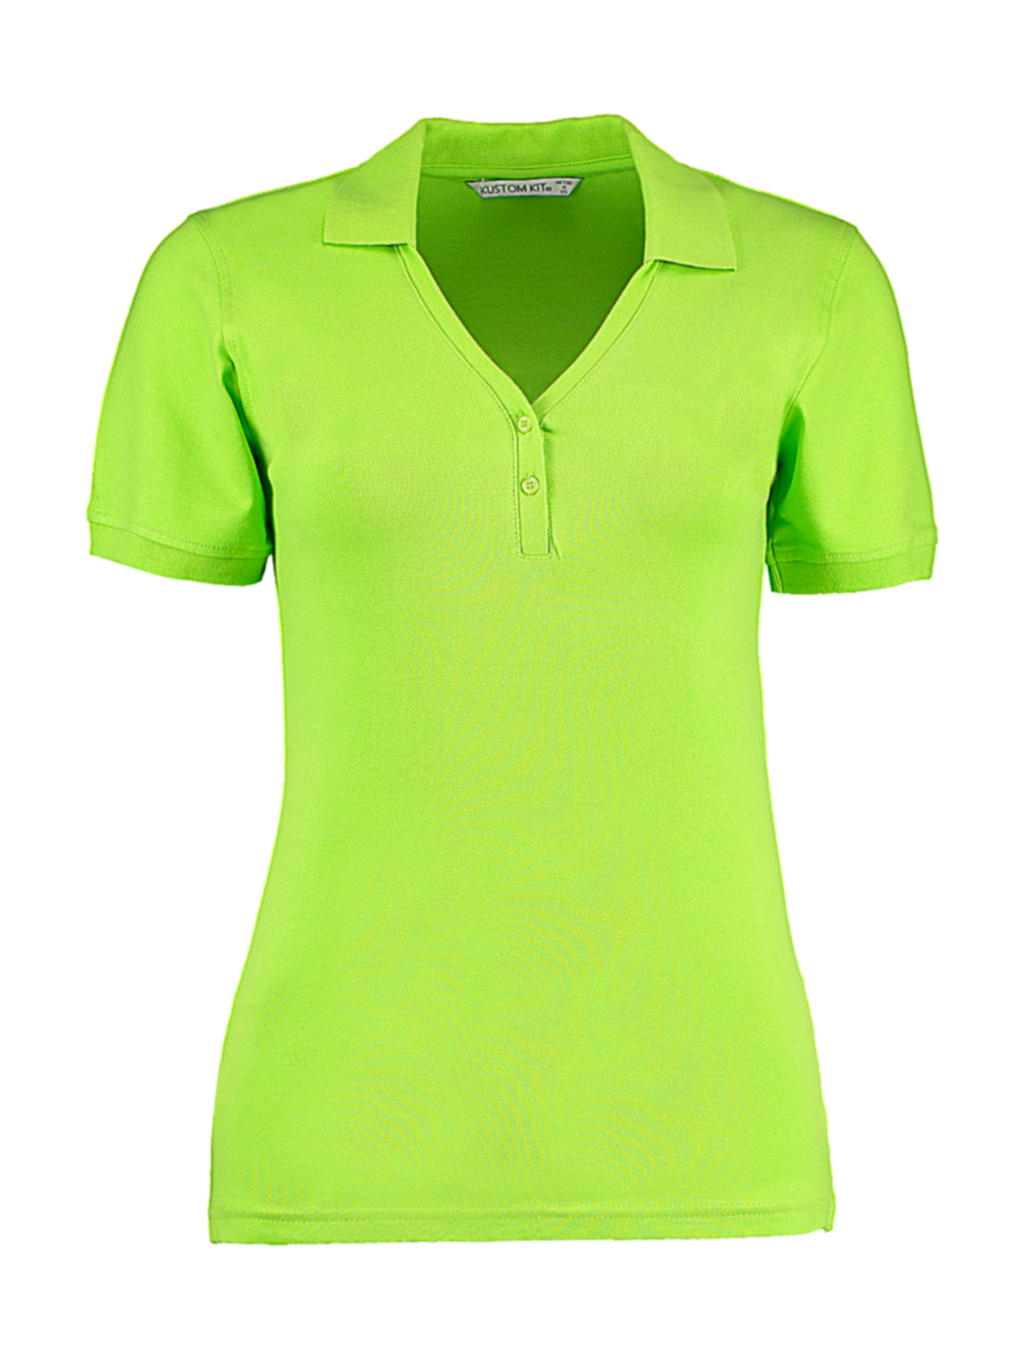  Womens Regular Fit Comfortec? V Neck Polo in Farbe Lime